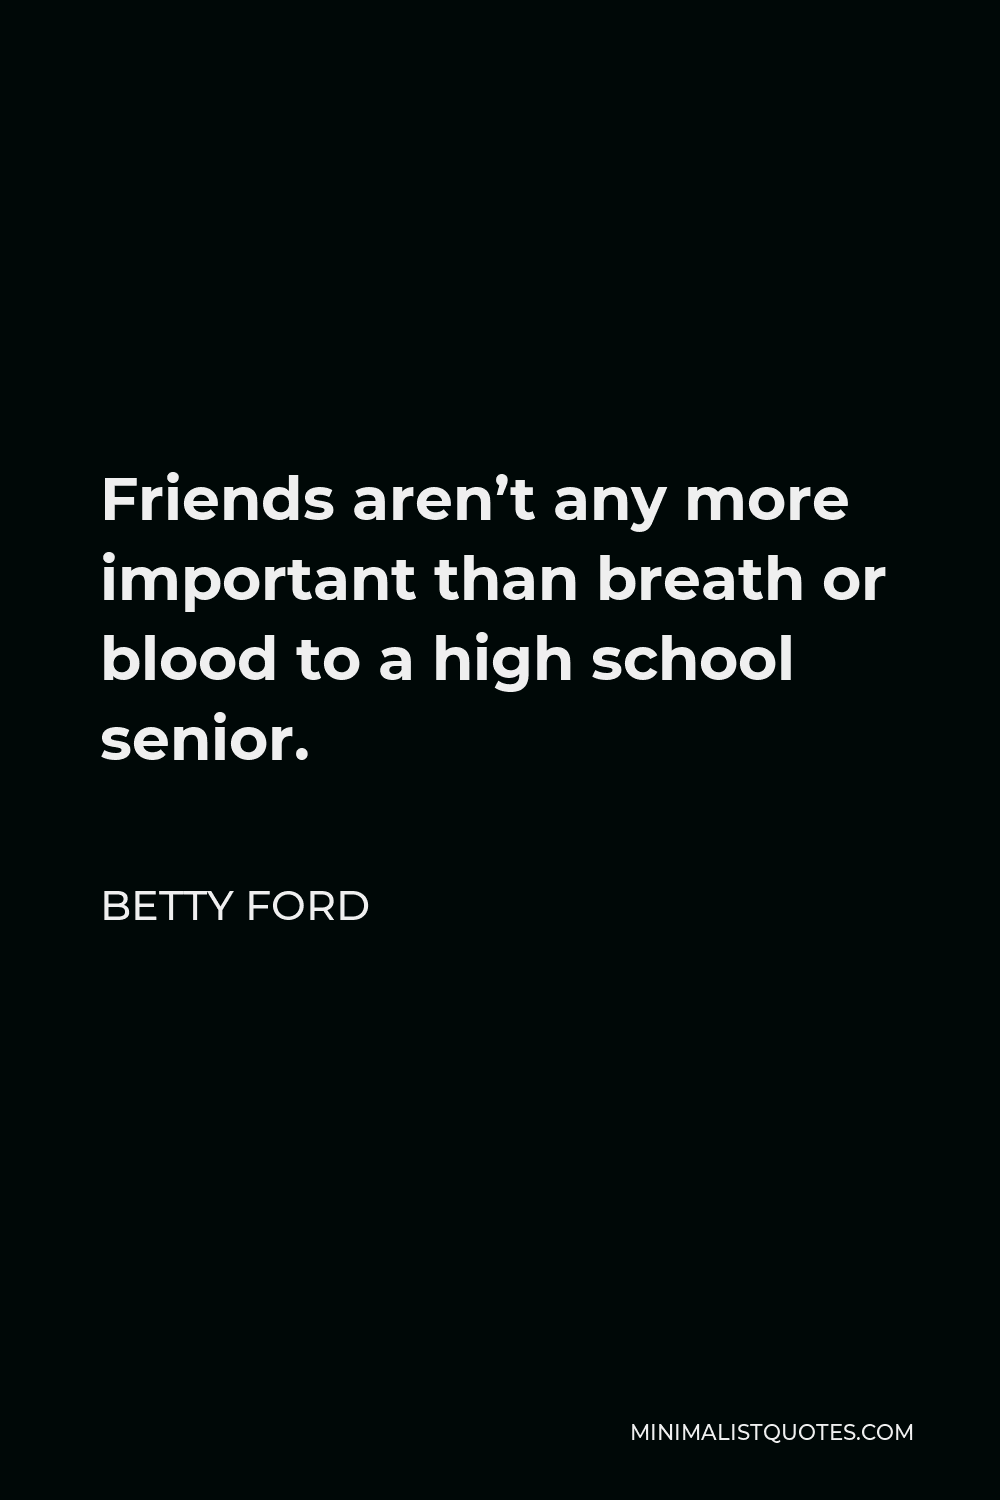 Betty Ford Quote - Friends aren’t any more important than breath or blood to a high school senior.